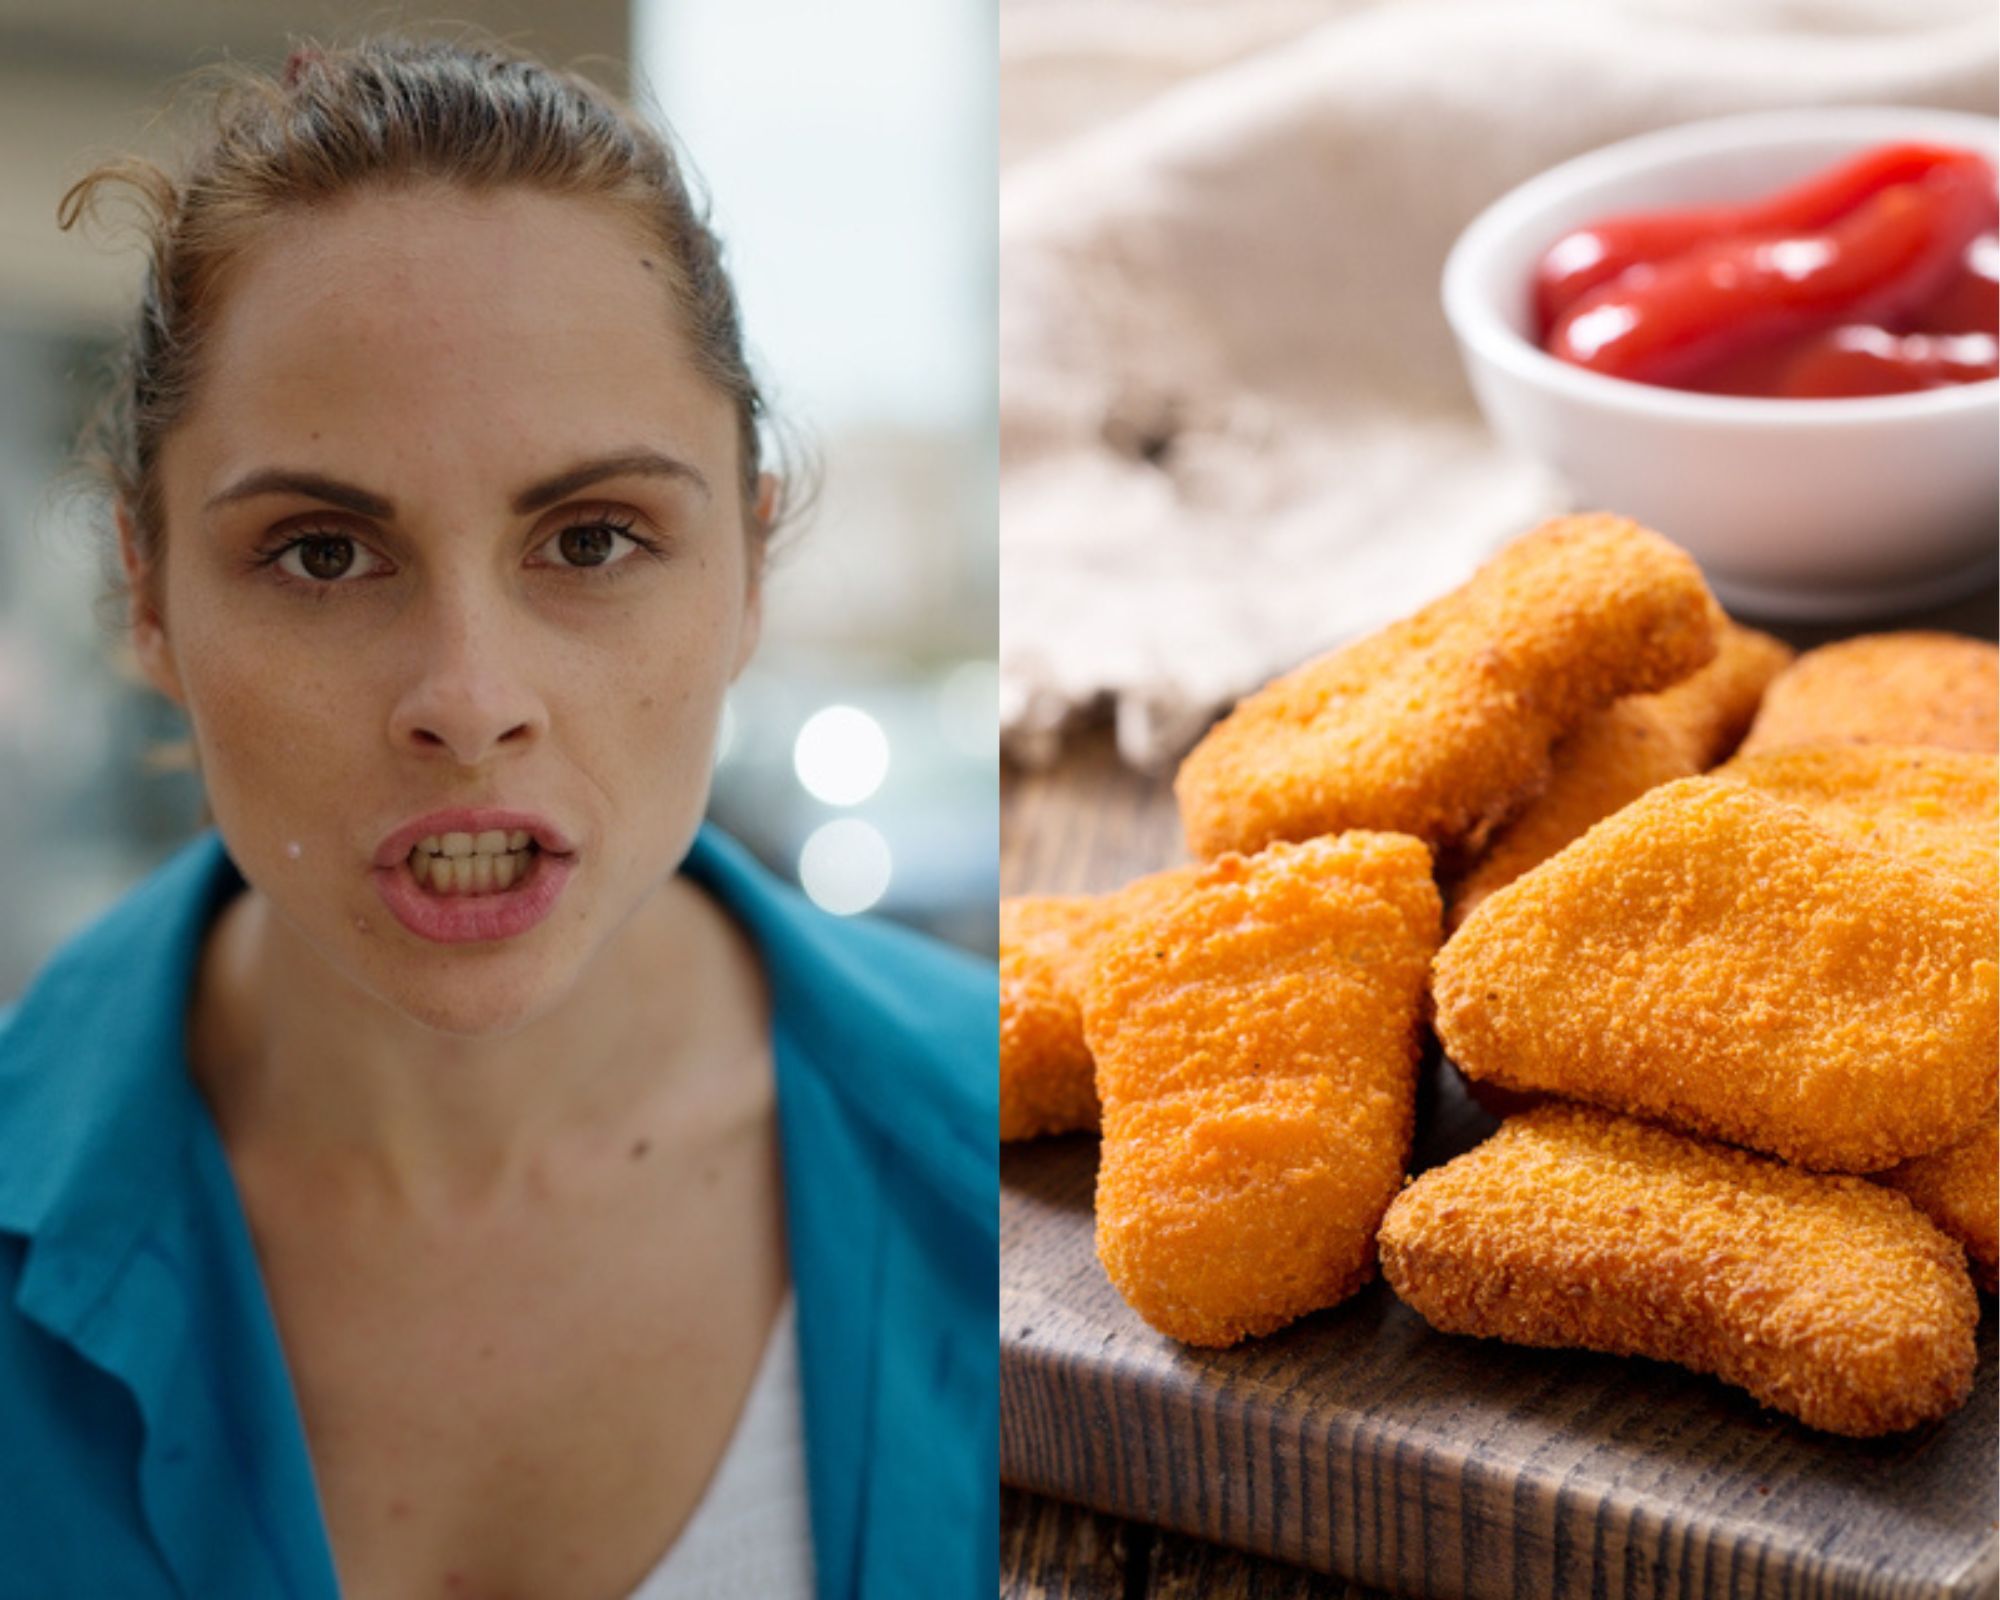 Woman Demands Babysitter Pay Her $600 Because She Fed Her Kids Chicken Nuggets